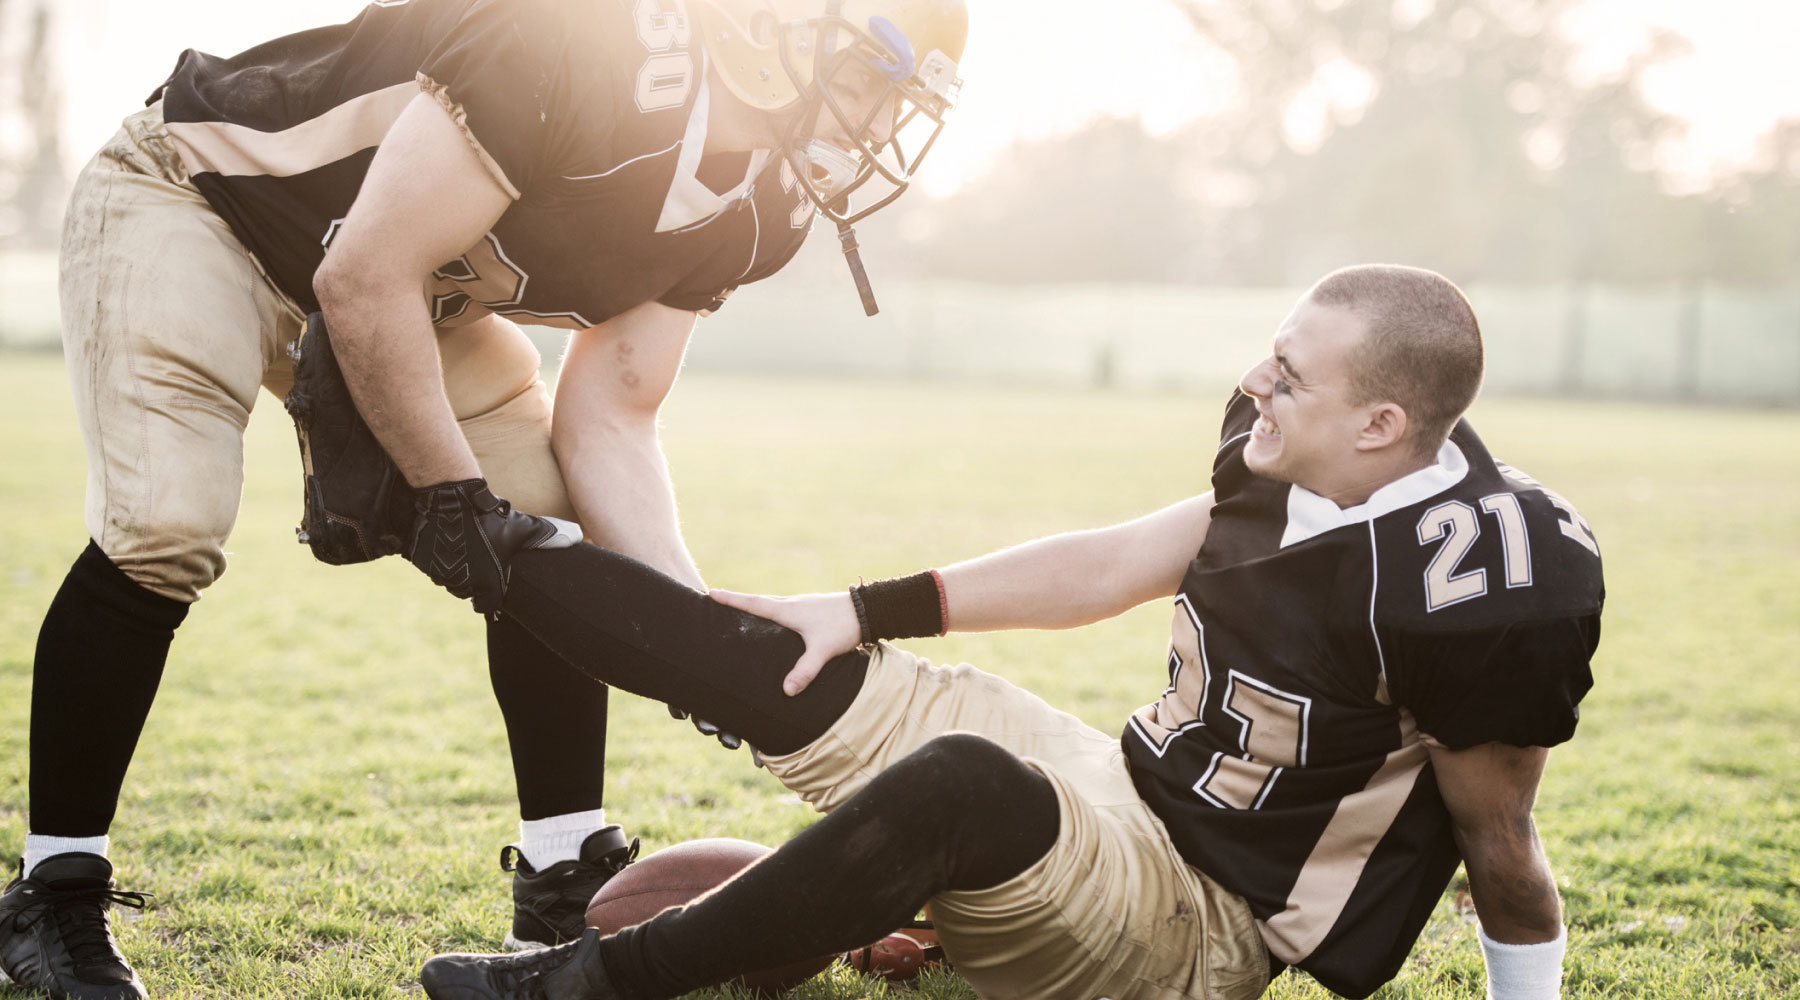 The Most Common Football Injuries (and What To Do if You've Sustained One)  - Access Sports Medicine & Orthopaedics